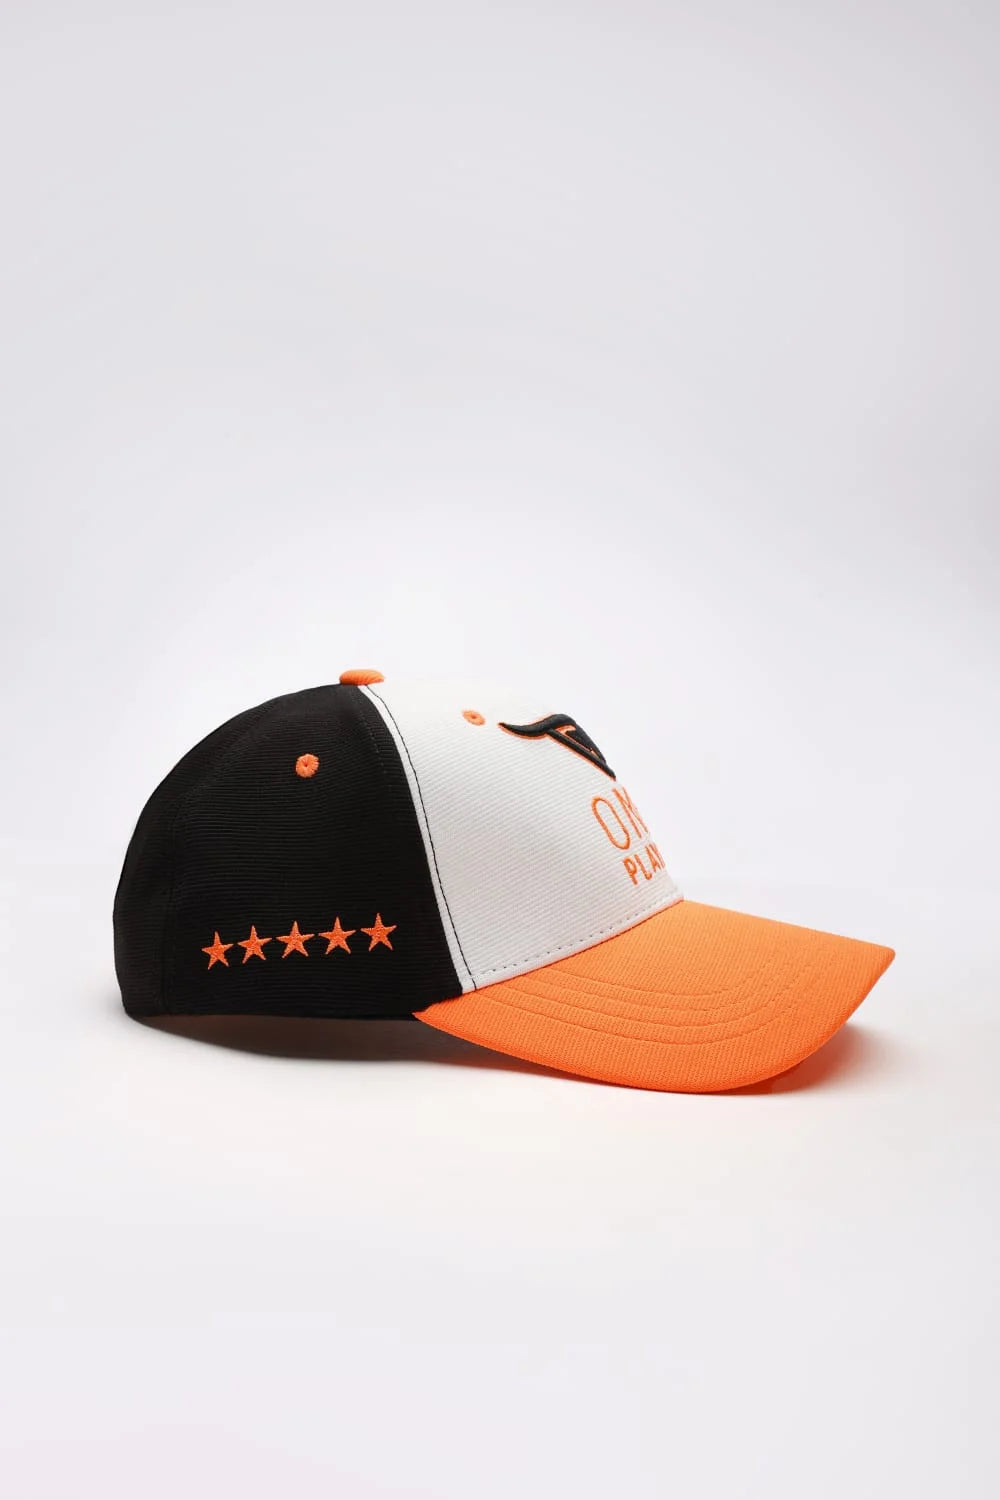 Unisex Tri Color solid baseball cap, has a visor by one player